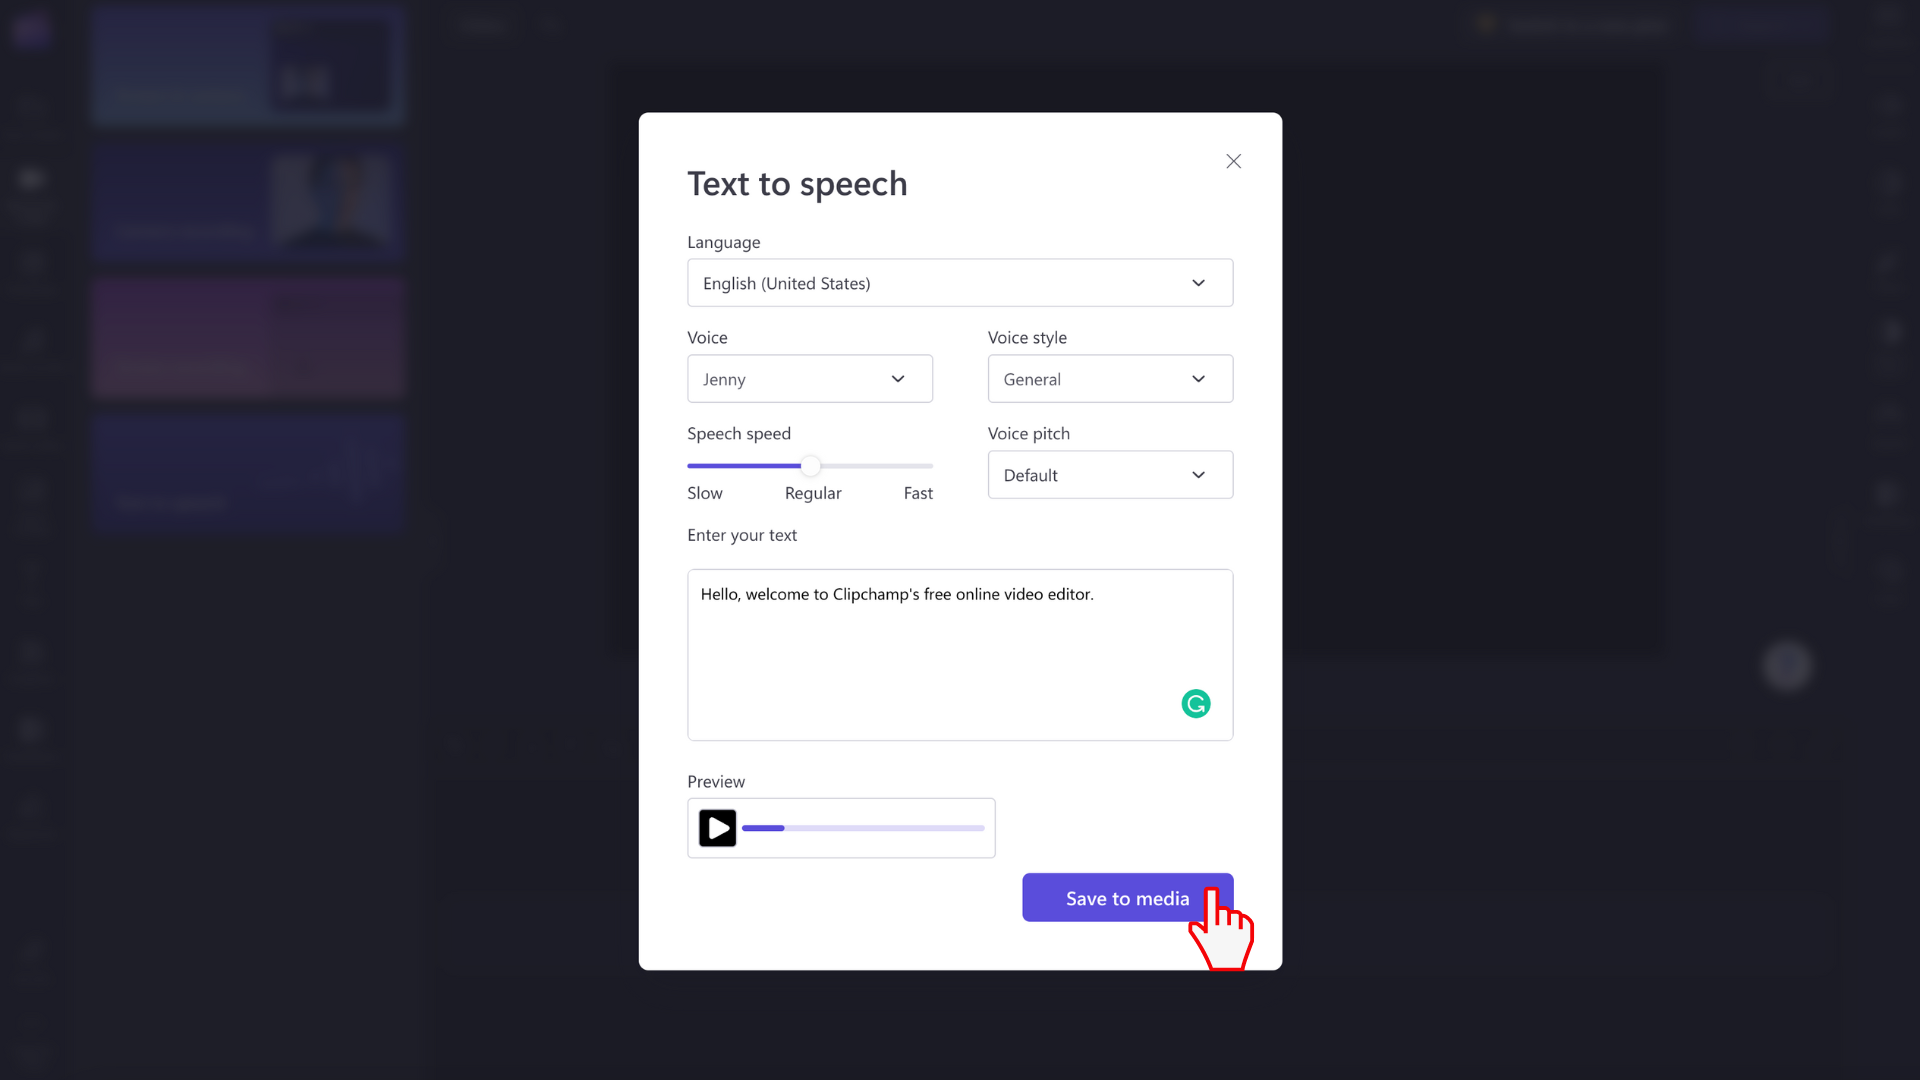 An image of a user saving the text to speech.